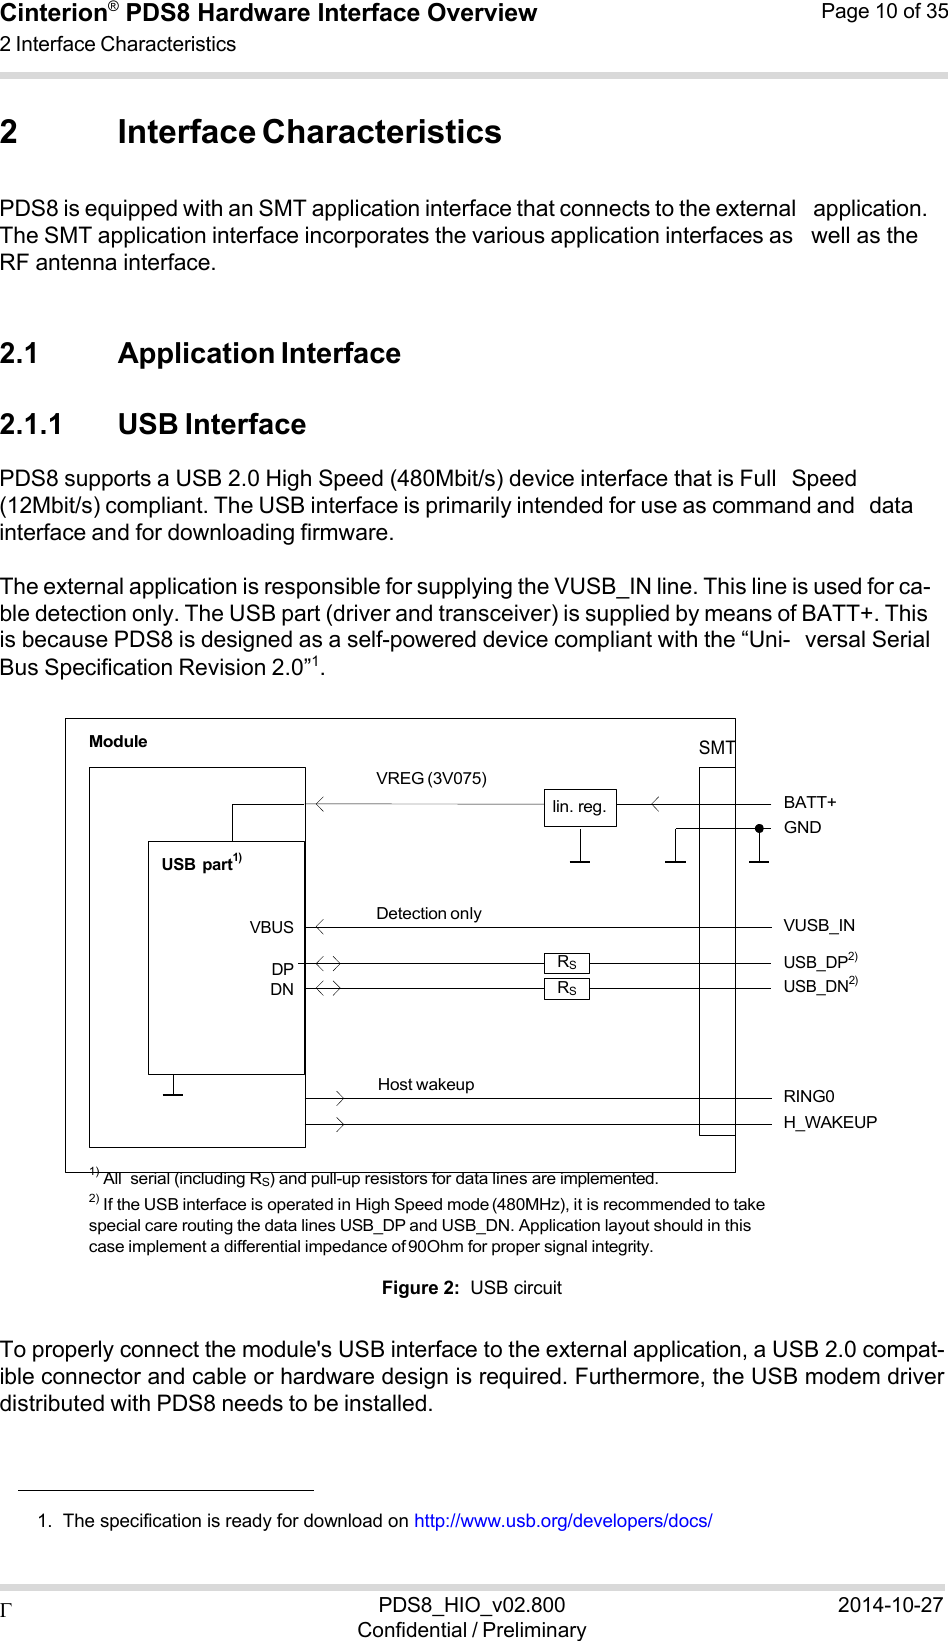  PDS8_HIO_v02.800Confidential / Preliminary2014-10-27Cinterion®  PDS8 Hardware Interface Overview 2 Interface Characteristics Page 10 of 35   2 Interface Characteristics  PDS8 is equipped with an SMT application interface that connects to the external application. The SMT application interface incorporates the various application interfaces as well as the RF antenna interface.   2.1 Application Interface  2.1.1 USB Interface PDS8 supports a USB 2.0 High Speed (480Mbit/s) device interface that is Full Speed (12Mbit/s) compliant. The USB interface is primarily intended for use as command and data interface and for downloading firmware.  The external application is responsible for supplying the VUSB_IN line. This line is used for ca- ble detection only. The USB part (driver and transceiver) is supplied by means of BATT+. This is because PDS8 is designed as a self-powered device compliant with the “Uni- versal Serial Bus Specification Revision 2.0”1.   Module       USB  part1)    VREG (3V075)      lin. reg.  SMT     BATT+ GND   VBUS  DP DN Detection only  RS RS  VUSB_IN USB_DP2) USB_DN2)    Host wakeup   RING0 H_WAKEUP  1) All  serial (including RS) and pull-up resistors for data lines are implemented. 2) If the USB interface is operated in High Speed mode (480MHz), it is recommended to take special care routing the data lines USB_DP and USB_DN. Application layout should in this case implement a differential impedance of 90Ohm for proper signal integrity.  Figure 2:  USB circuit  To properly connect the module&apos;s USB interface to the external application, a USB 2.0 compat- ible connector and cable or hardware design is required. Furthermore, the USB modem driver distributed with PDS8 needs to be installed.      1.  The specification is ready for download on http://www.usb.org/developers/docs/ 